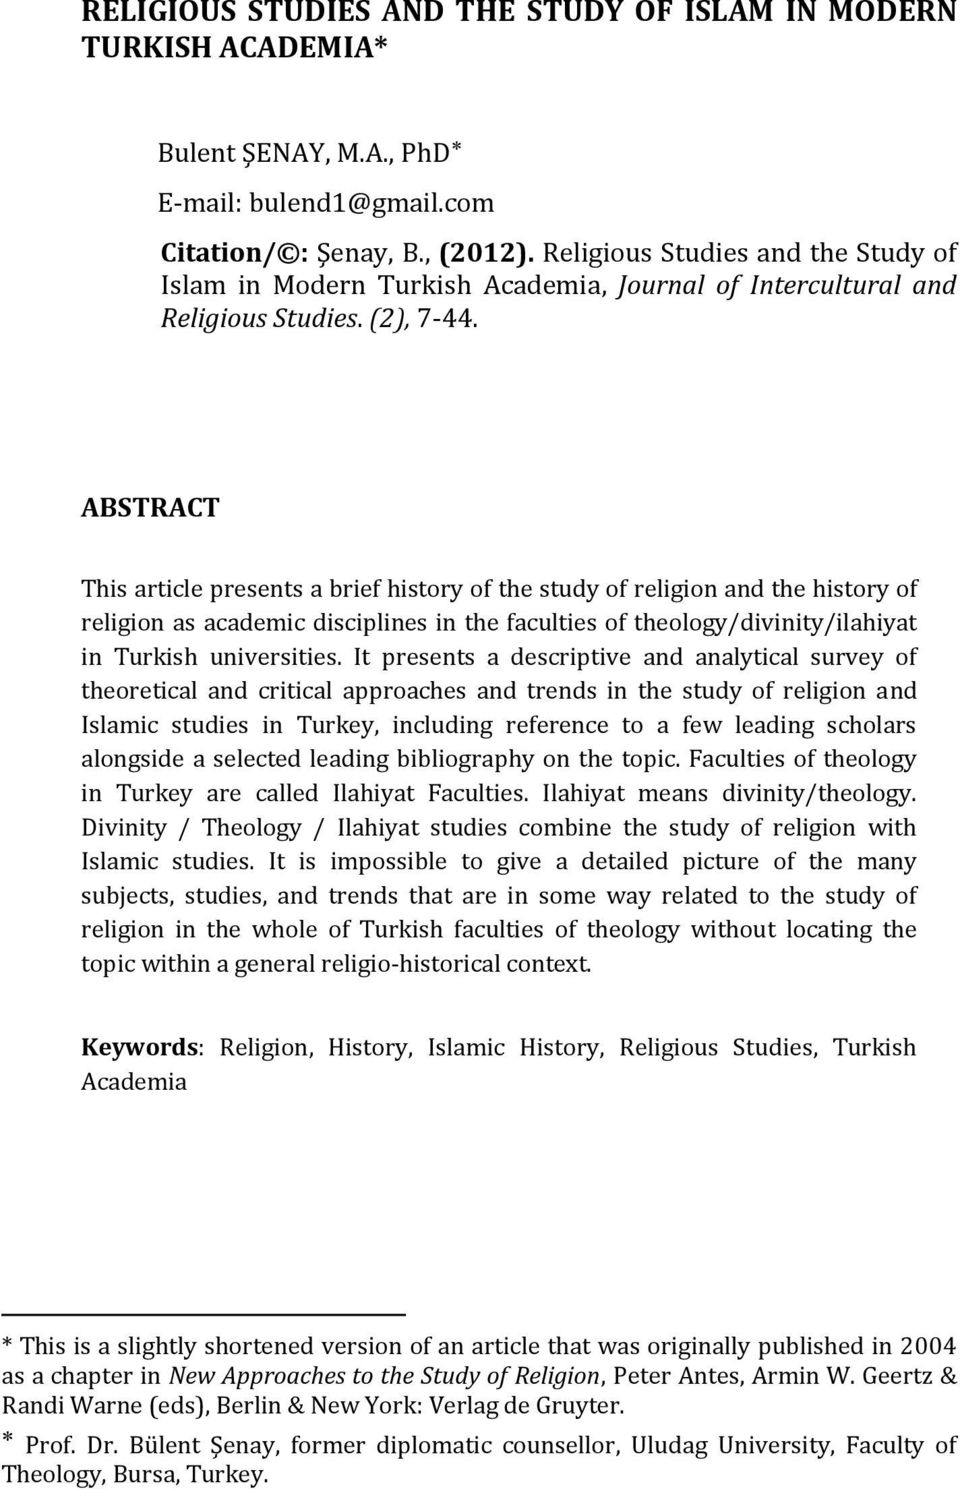 ABSTRACT This article presents a brief history of the study of religion and the history of religion as academic disciplines in the faculties of theology/divinity/ilahiyat in Turkish universities.